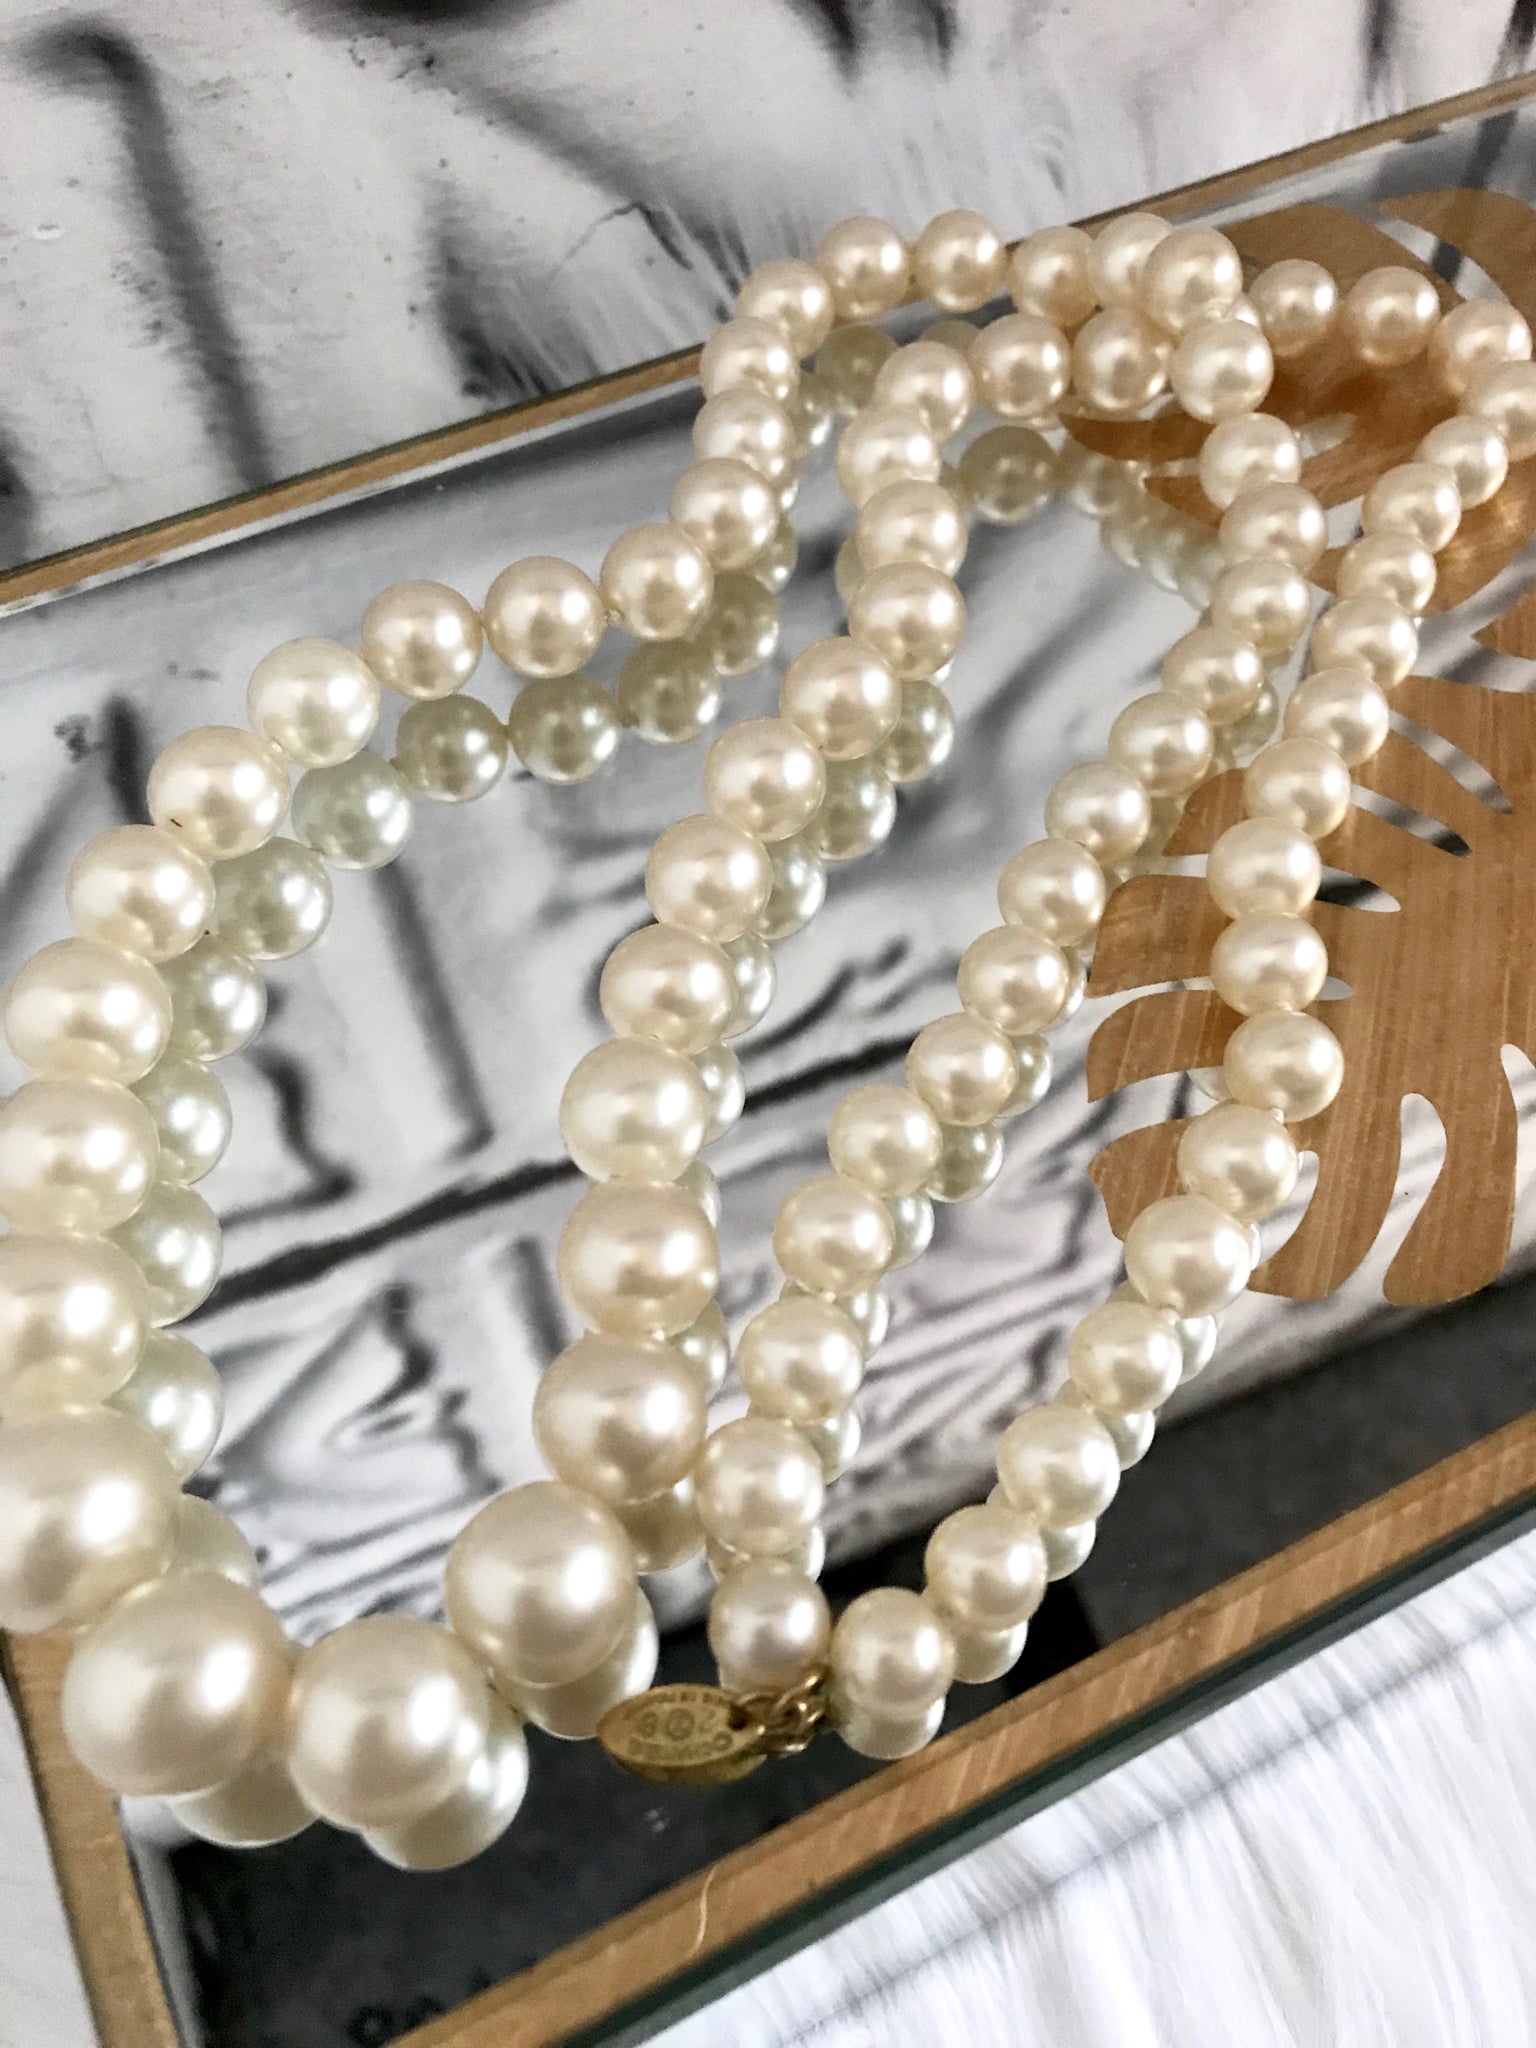  1920s Long Fake Pearls Necklace Layered Retro Vintage